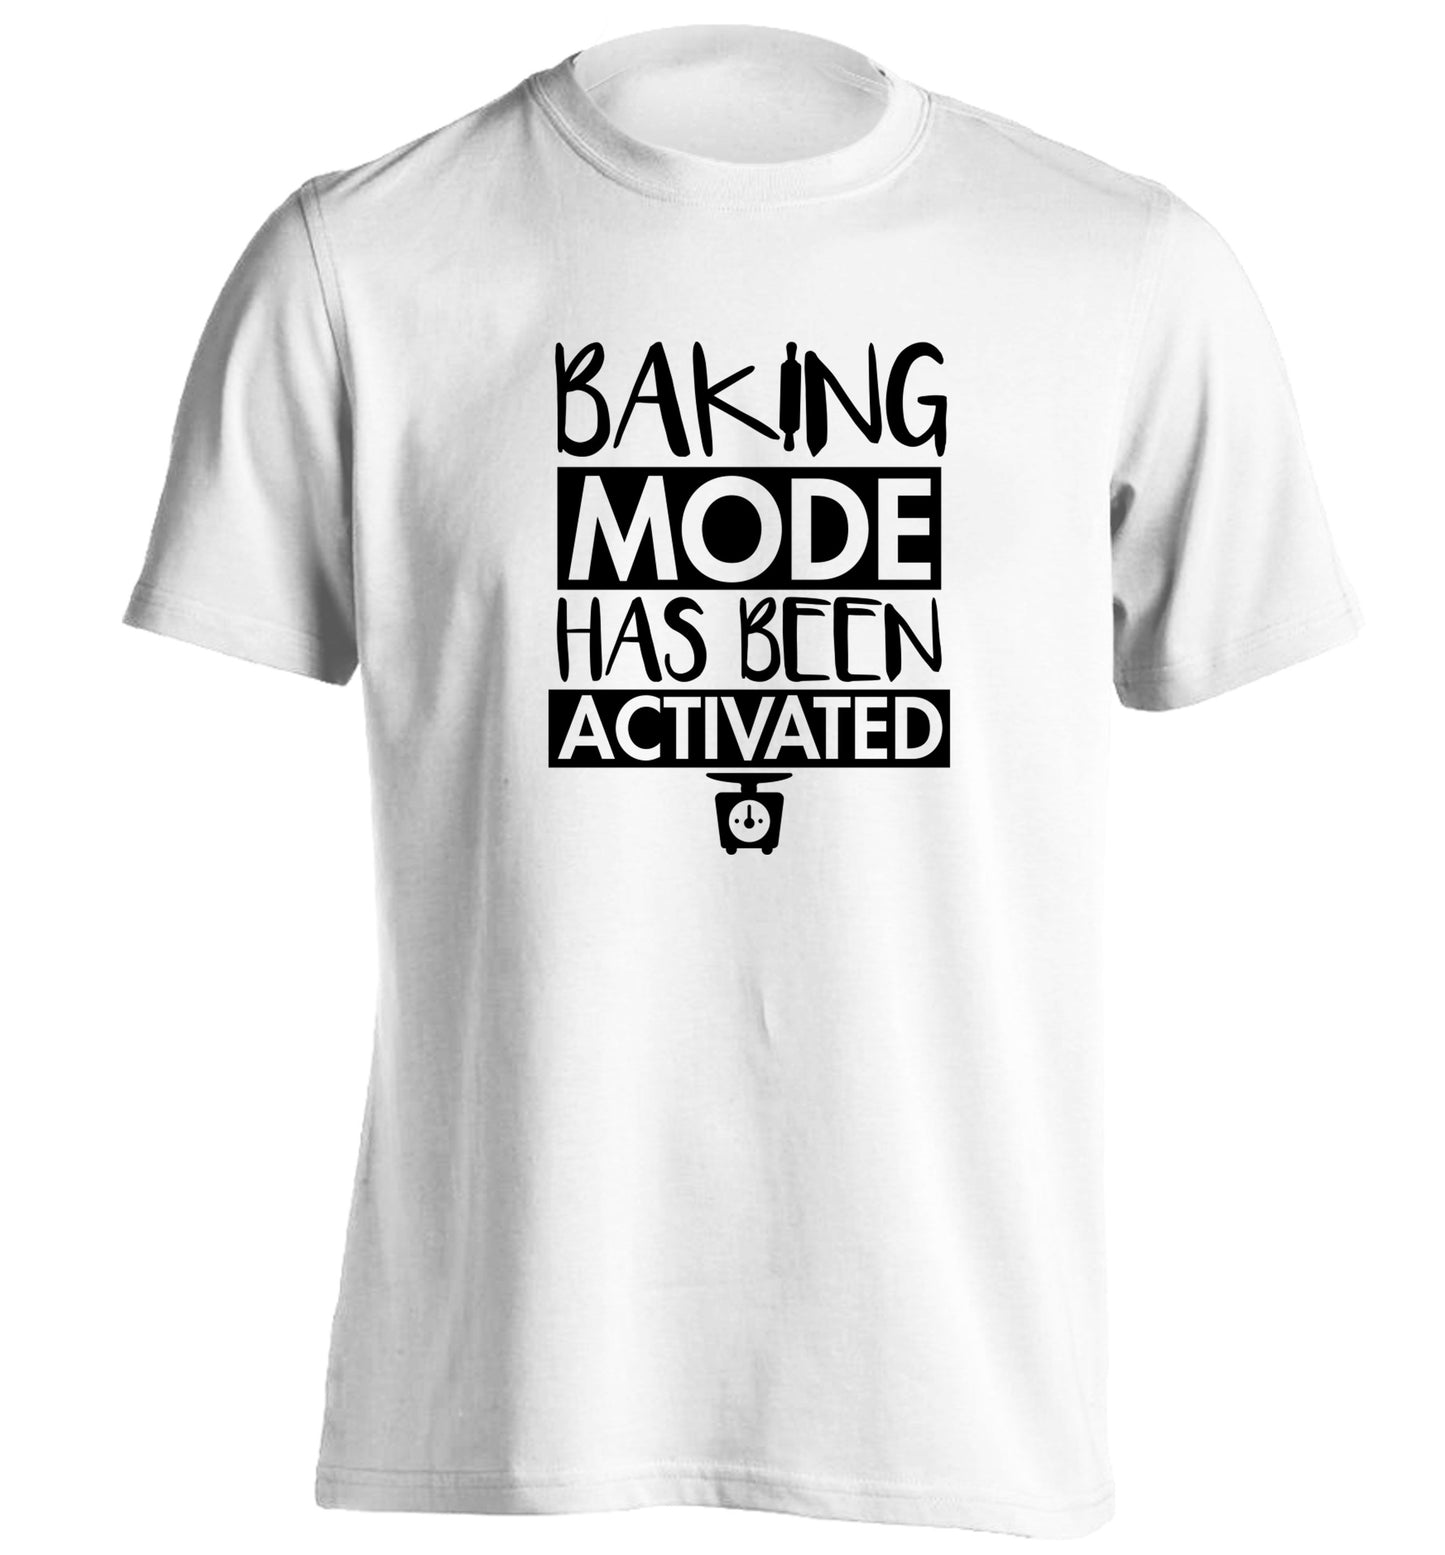 Baking mode has been activated adults unisex white Tshirt 2XL